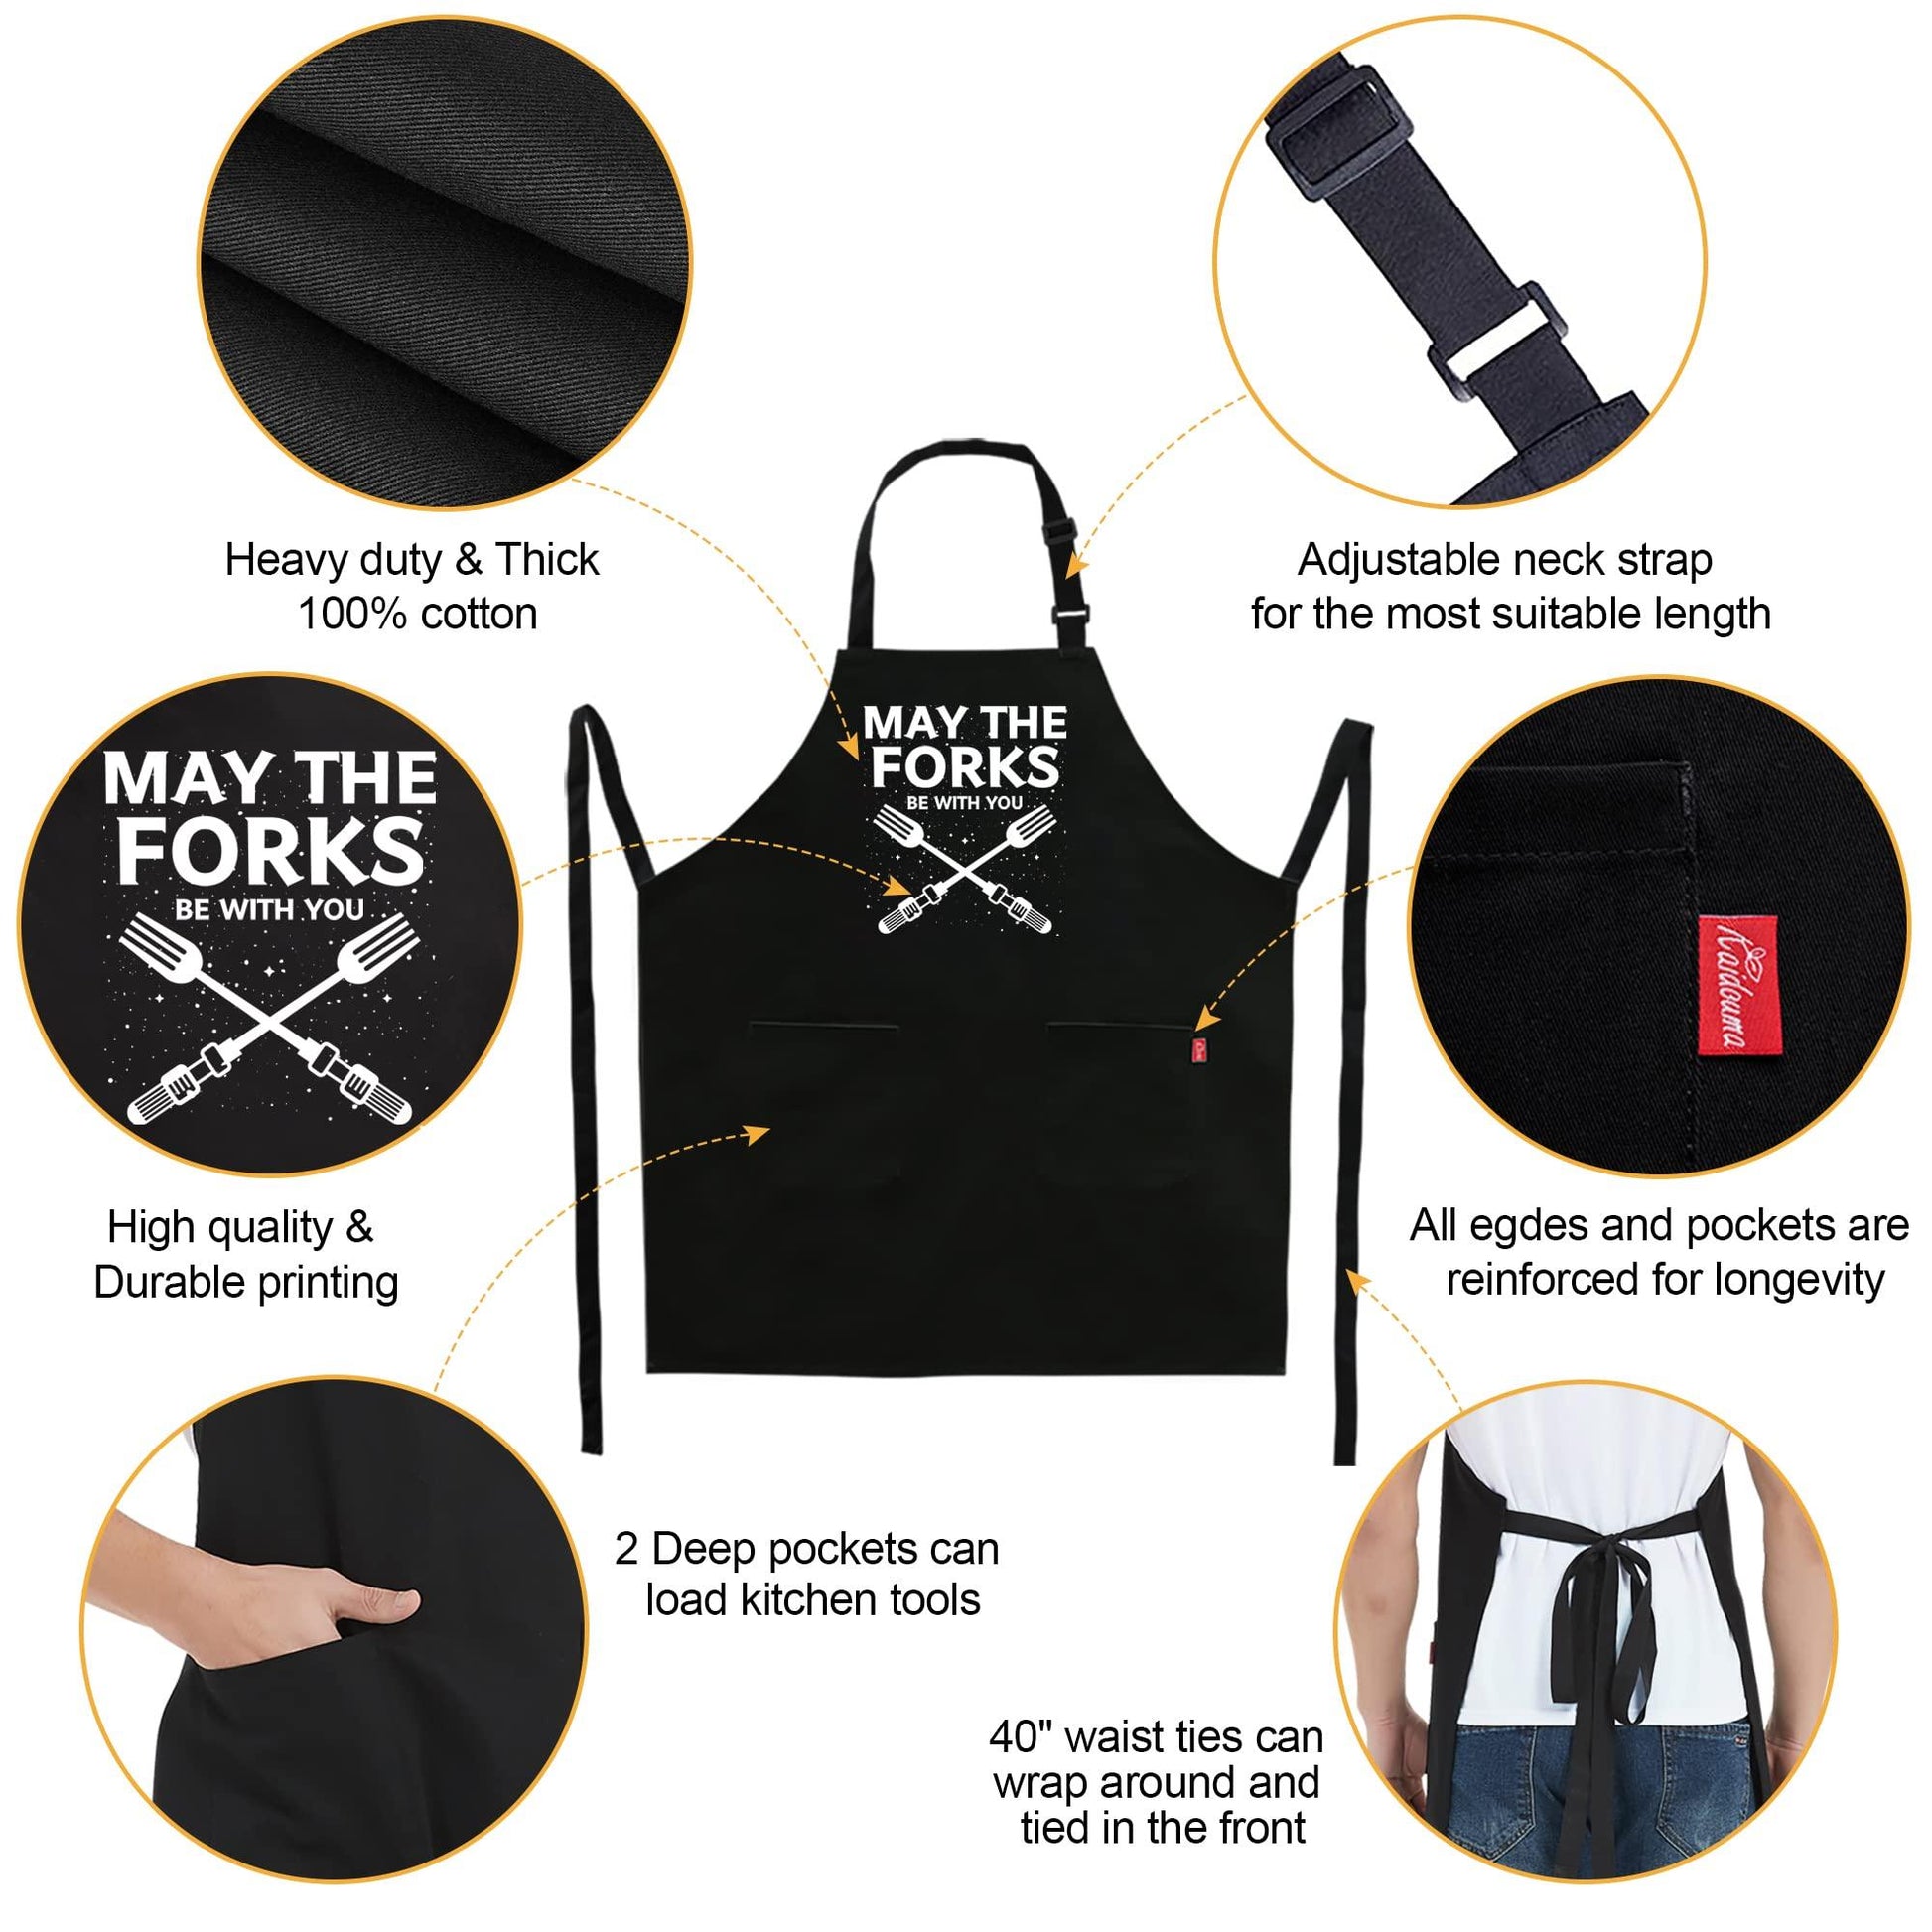 Kaidouma Funny Grill Aprons for Men - May The Forks Be With You - Men’s Funny Chef Cooking Grilling BBQ Aprons with 2 Pockets - Birthday Father’s Day Christmas Gifts for Dad, Husband, Movie Fans - CookCave